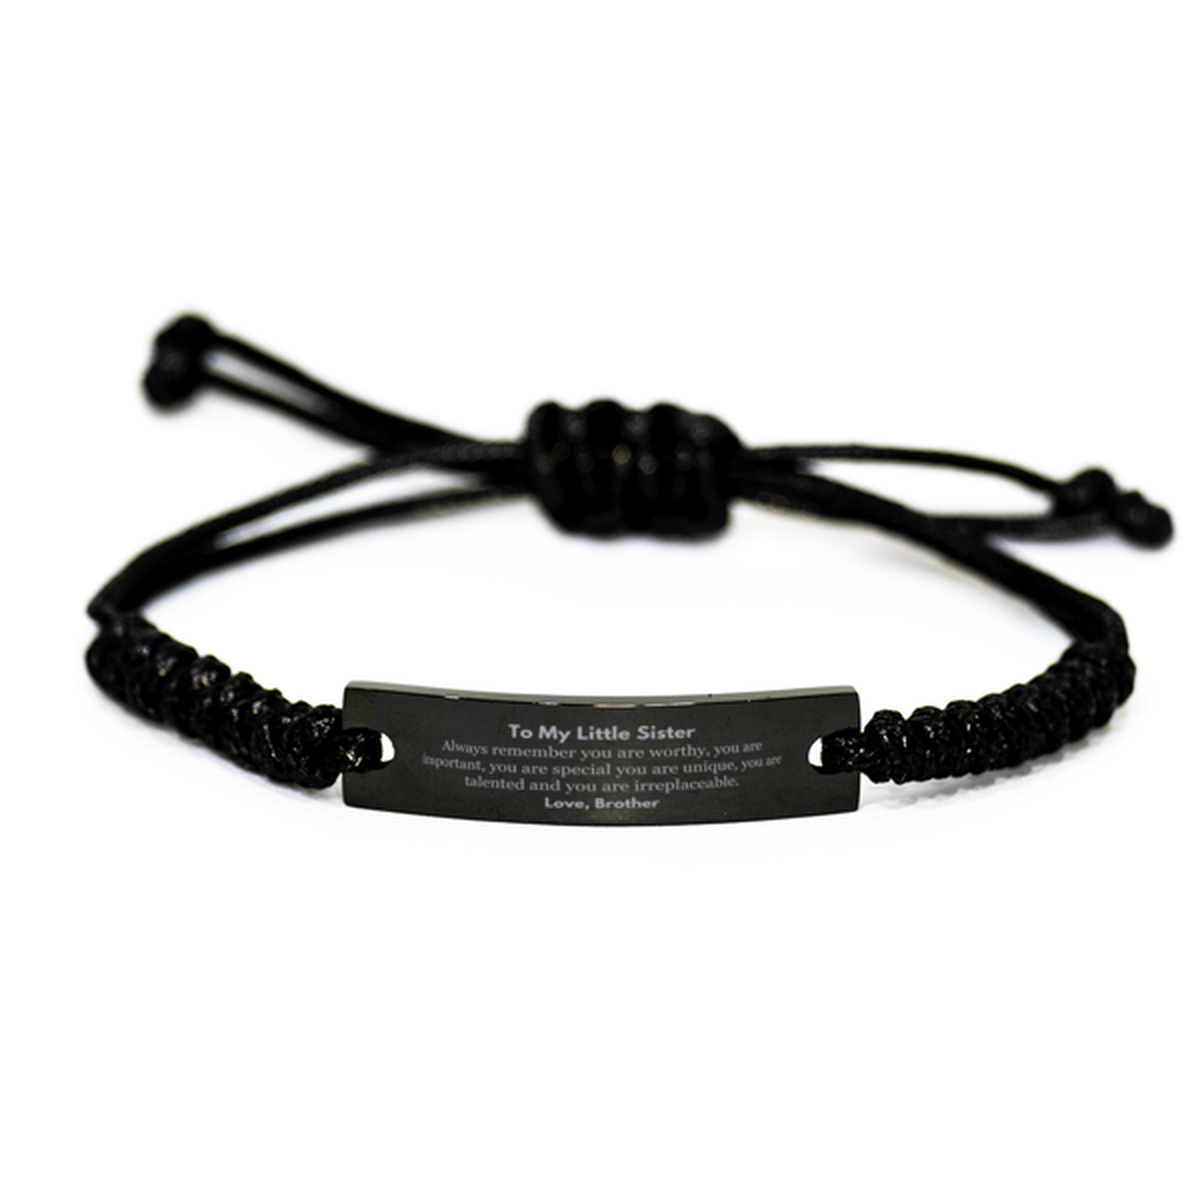 Little Sister Birthday Gifts from Brother, Inspirational Black Rope Bracelet for Little Sister Christmas Graduation Gifts for Little Sister Always remember you are worthy, you are important. Love, Brother